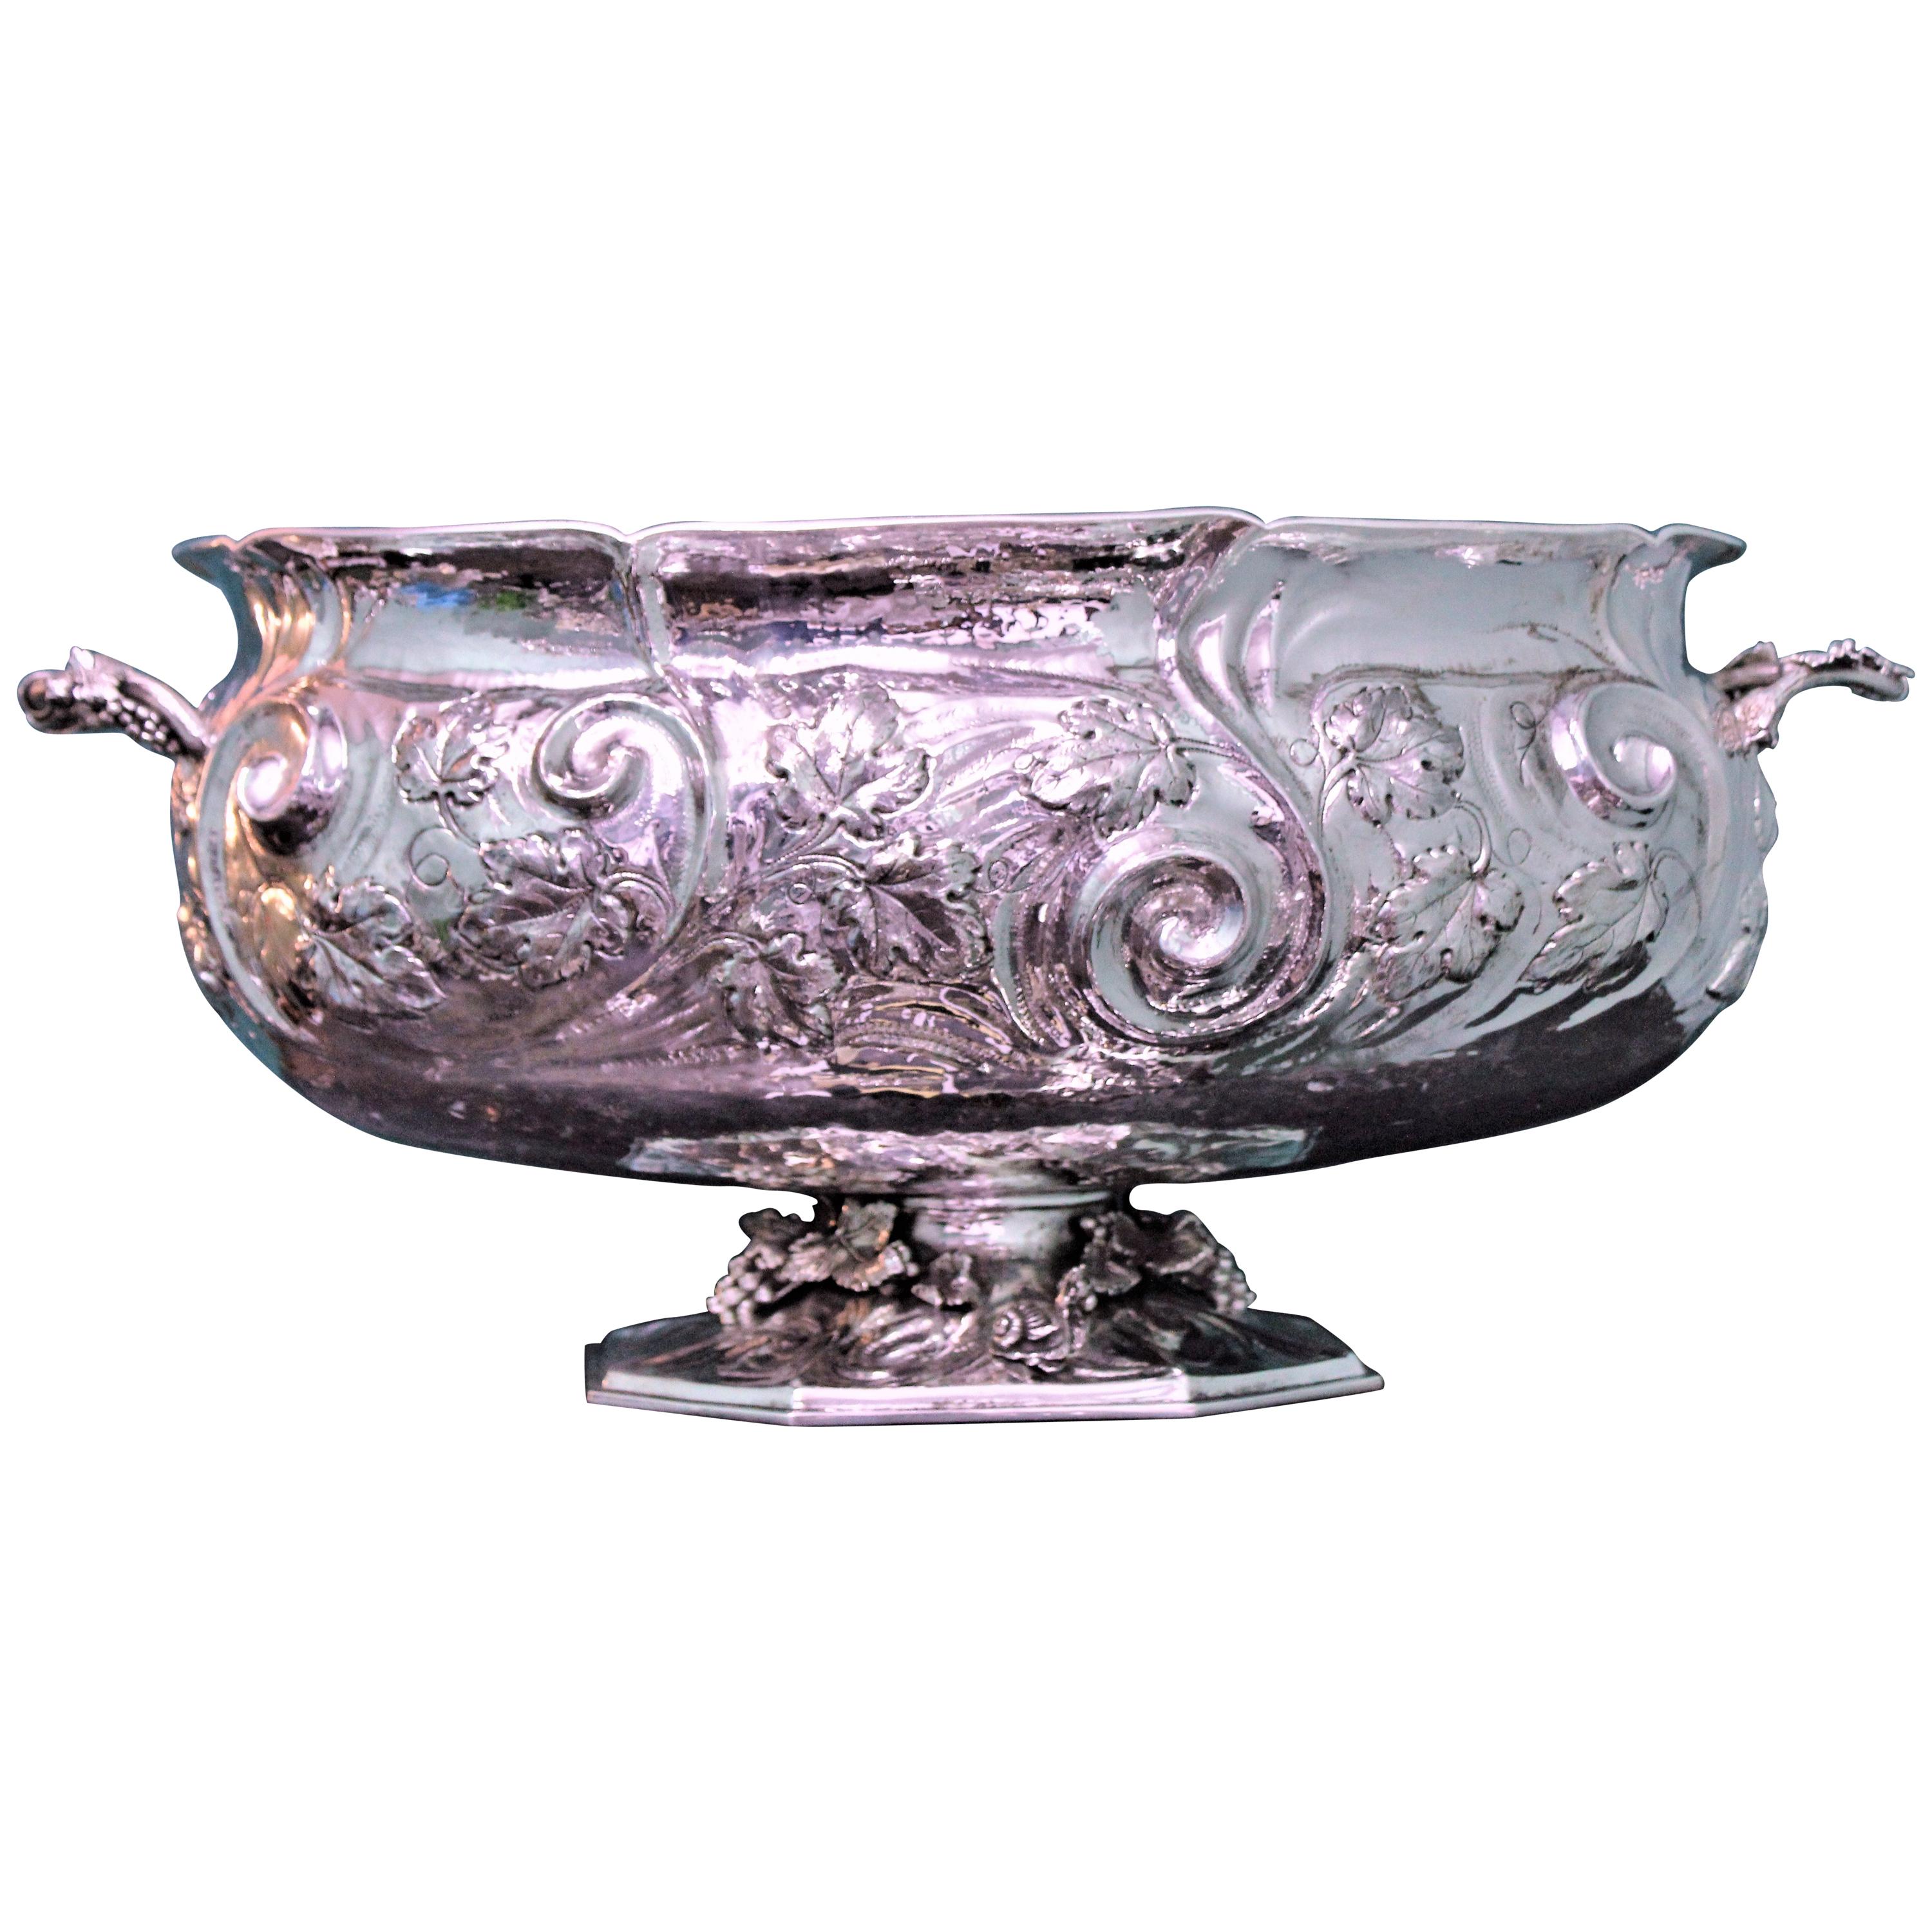 20th Century Fratelli Ponzone Rococo Engraved Silver Centerpiece, 1930s For Sale